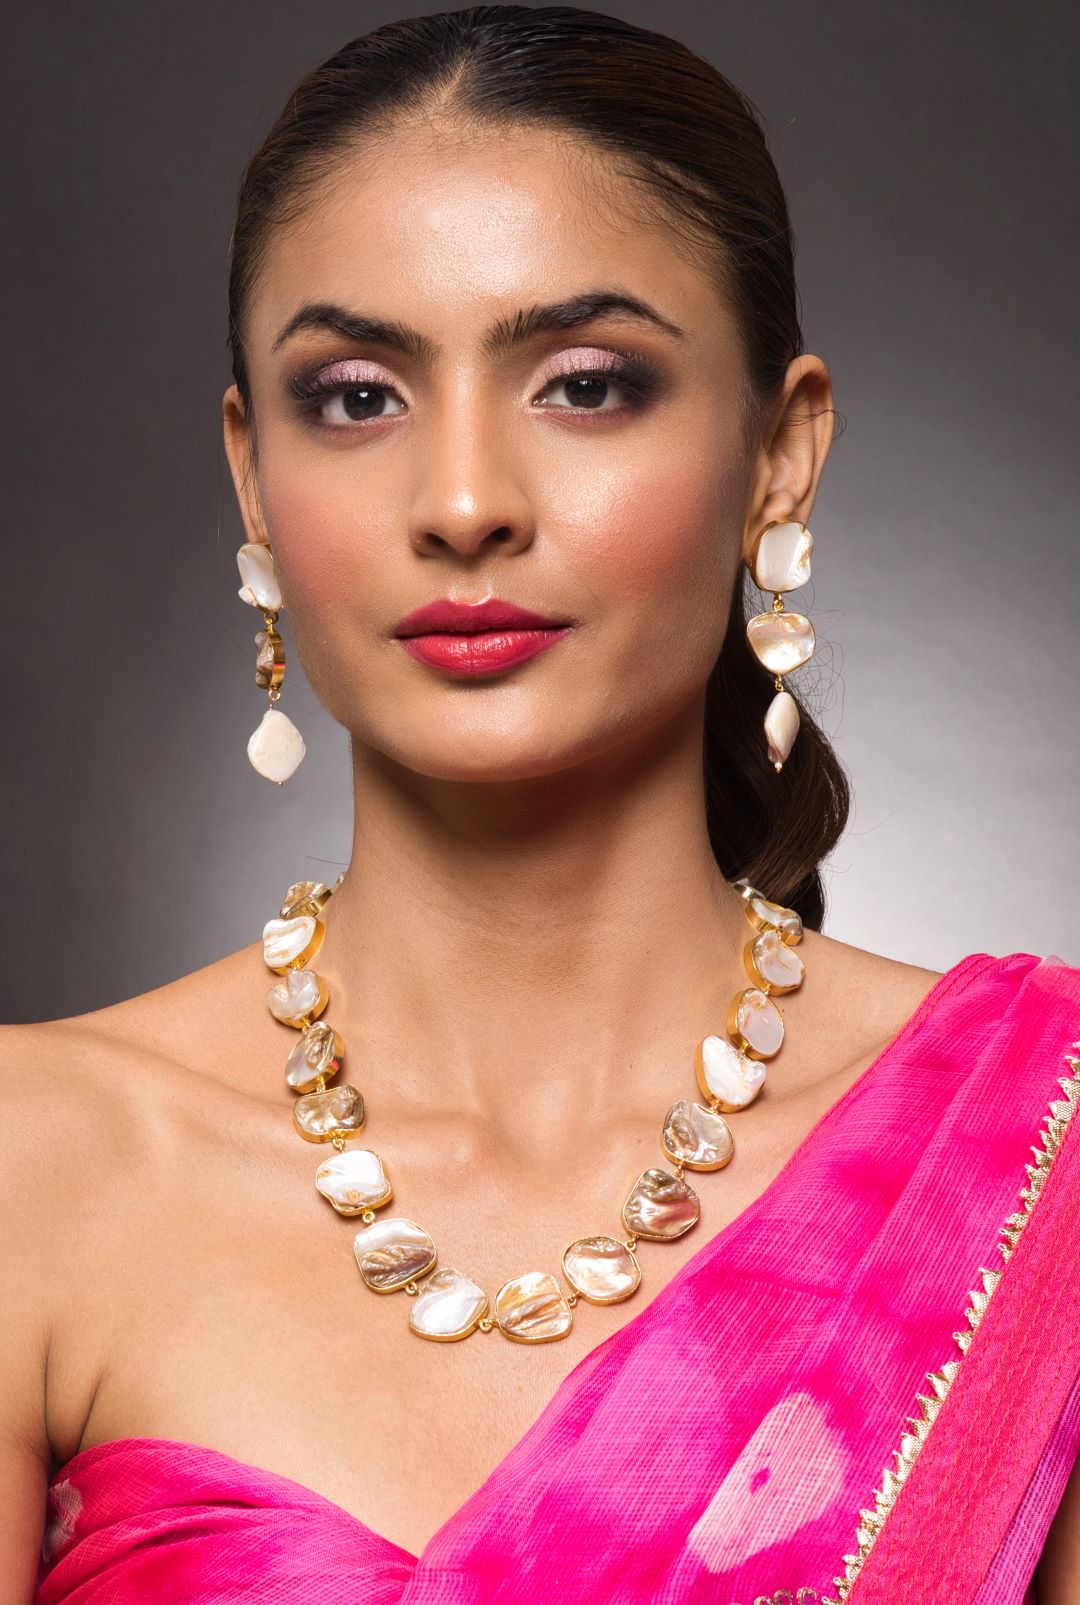 Hailey Baroque Pearl Necklace Set with Earrings - QUEENS JEWELS